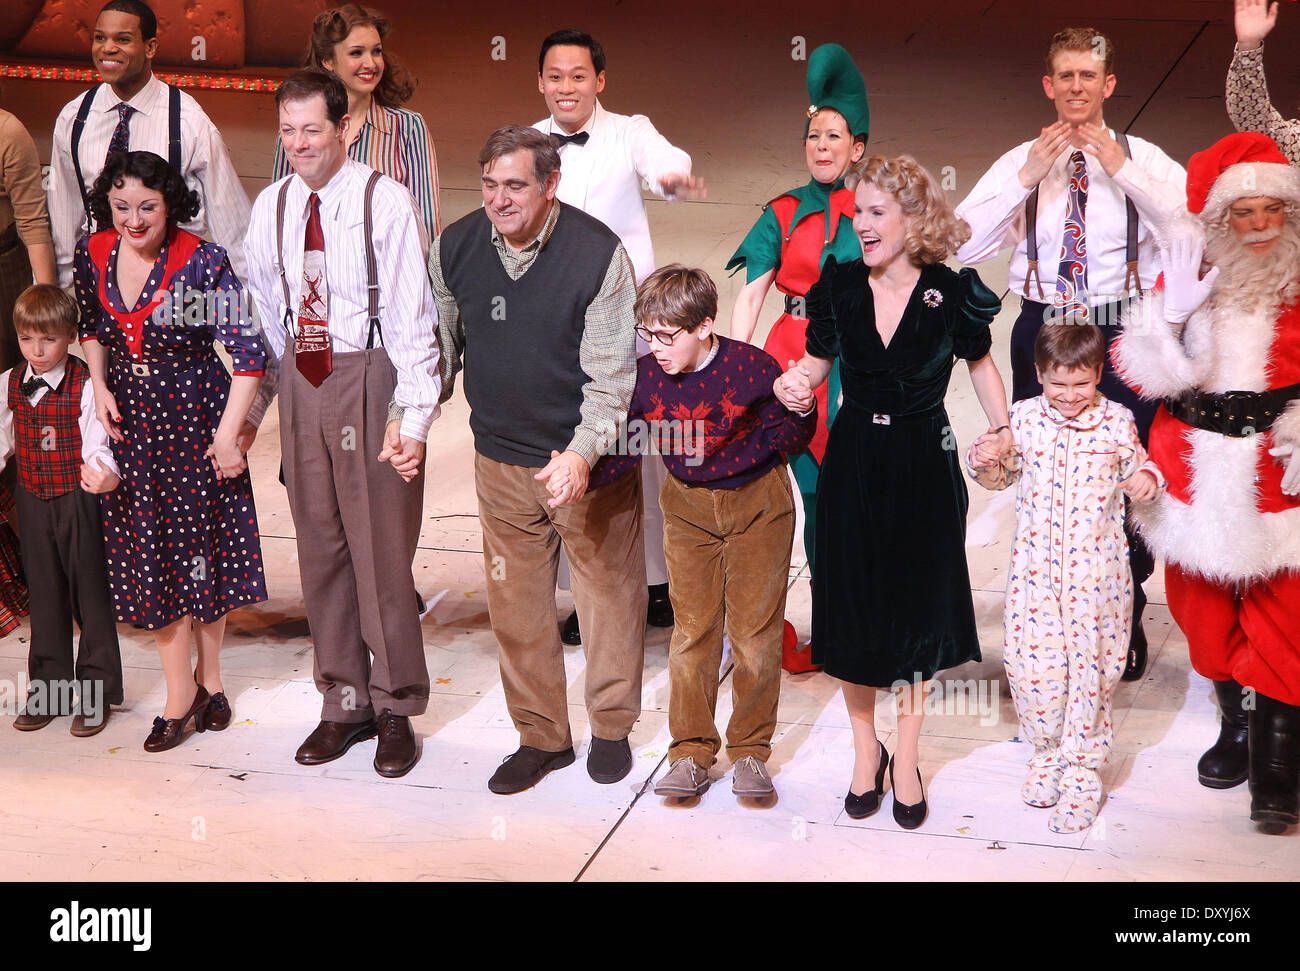 The premiere of 'A Christmas Story The Musical’ at the Lunt-Fontanne Theatre – Curtain Featuring: Caroline O’Connor,John Bolton,Dan Lauria,Johnny Rabe,Erin Dilly,Zac Ballard,Cast Where: New York City USA When: 19 Nov 2012 Stock Photo